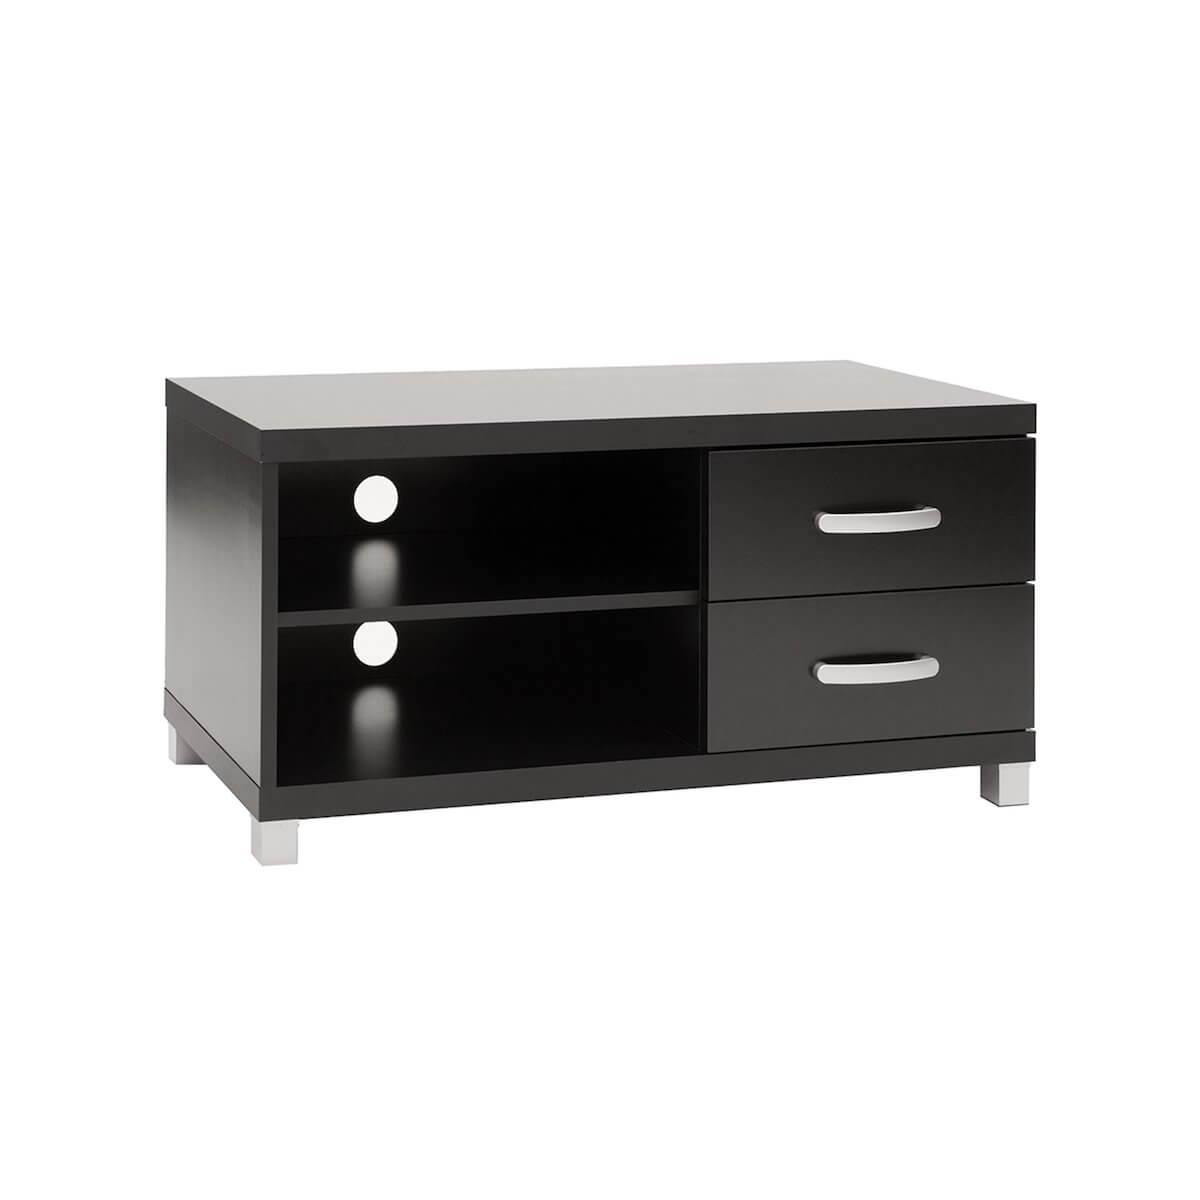 Techni Mobili Black Modern TV Stand with Storage for TVs Up To 40" RTA-8896-BK